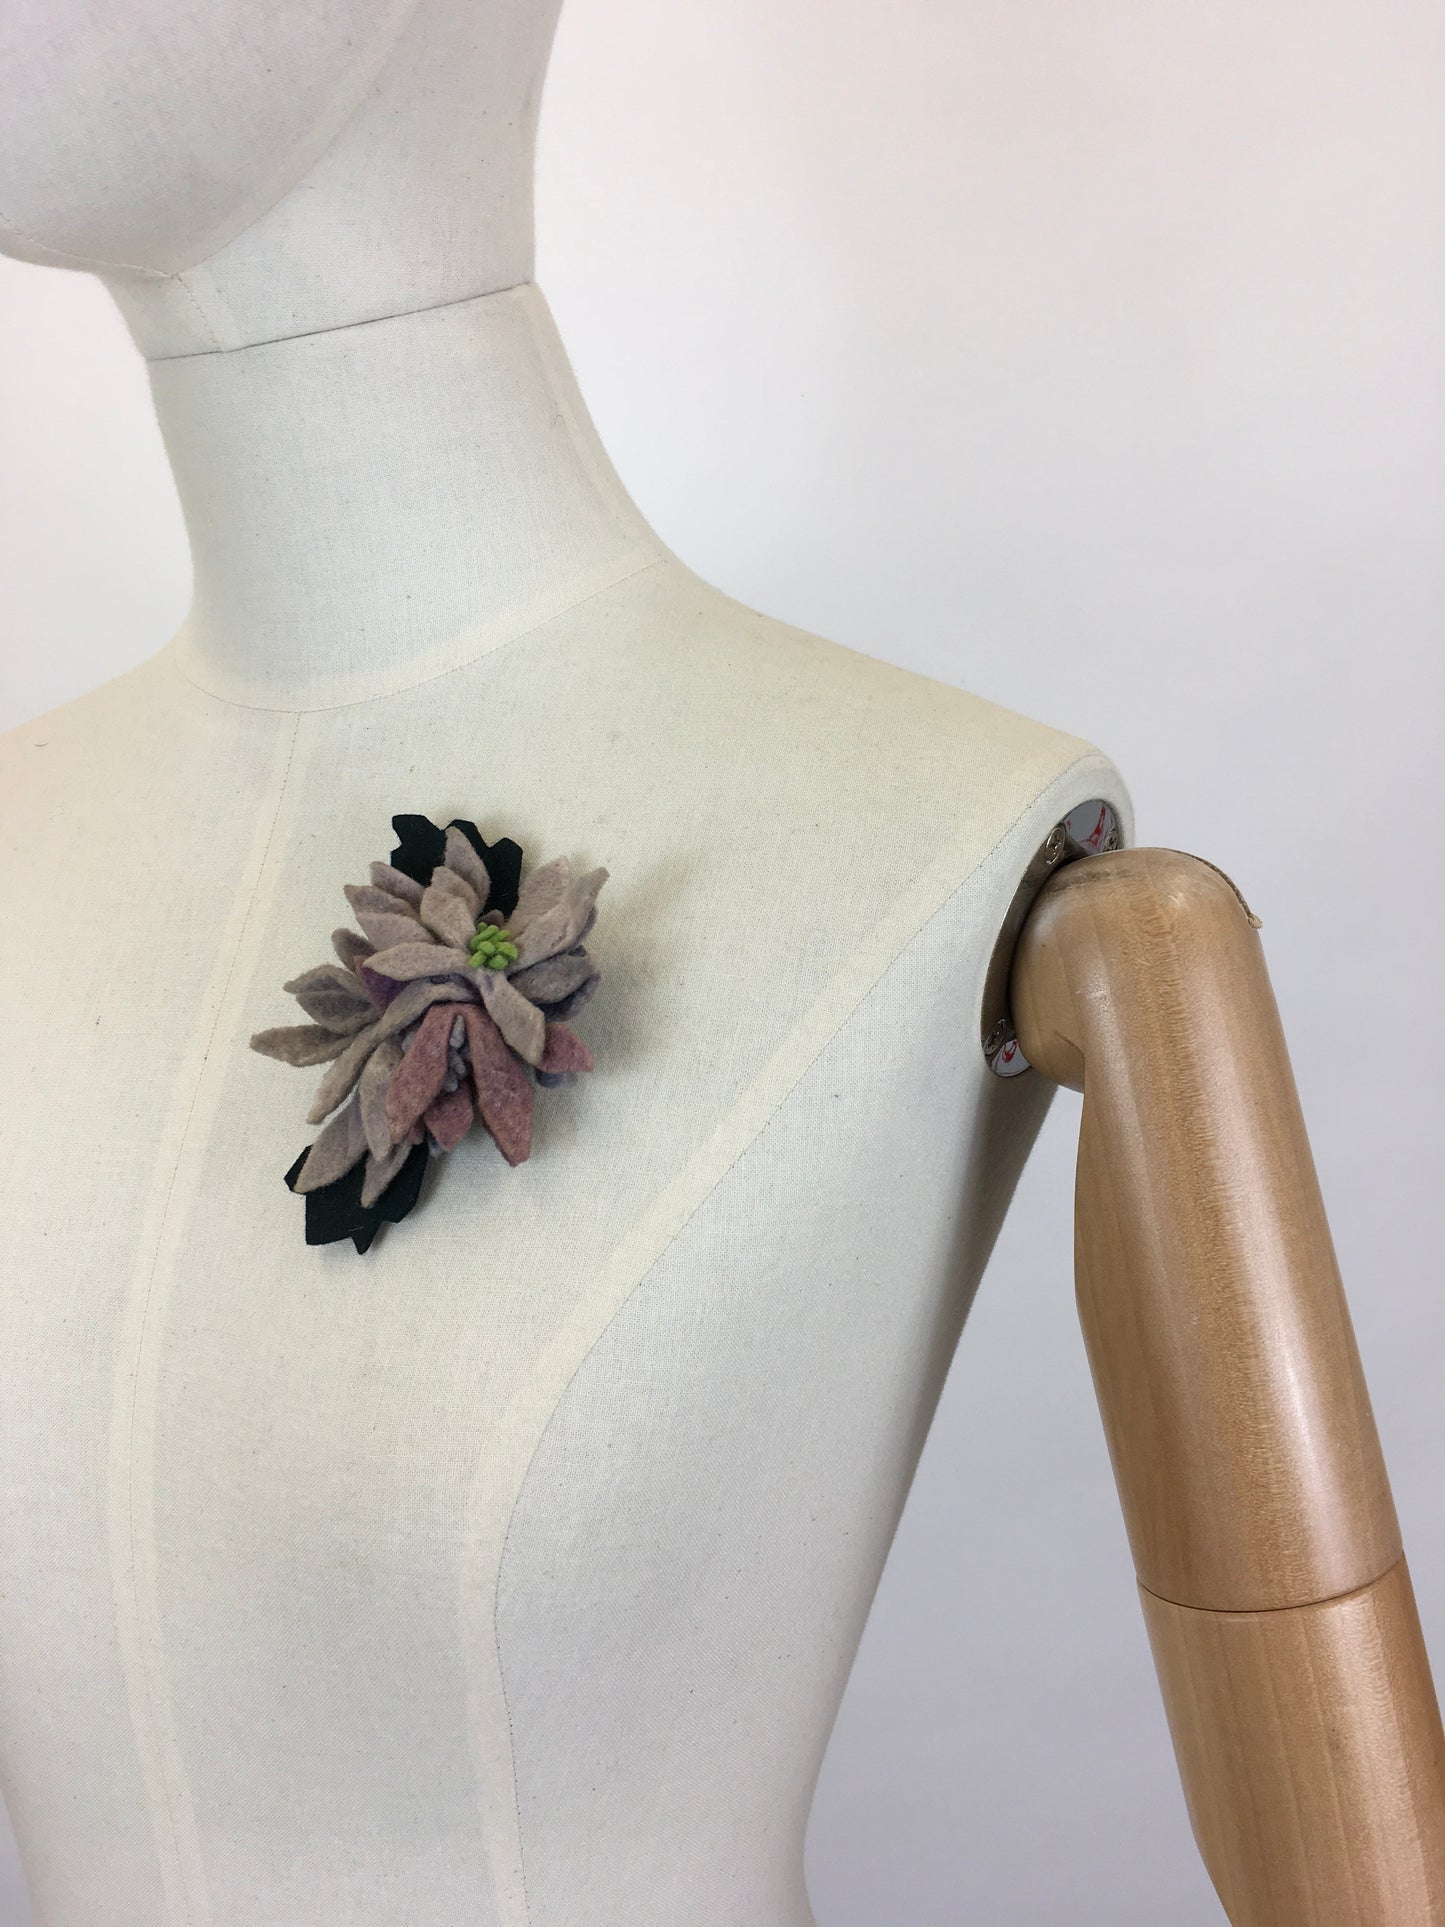 Original 1940’s ‘ Make Do And Mend ‘ Felt Floral Posy Corsage - In Muted Purple, Violets and Greenery